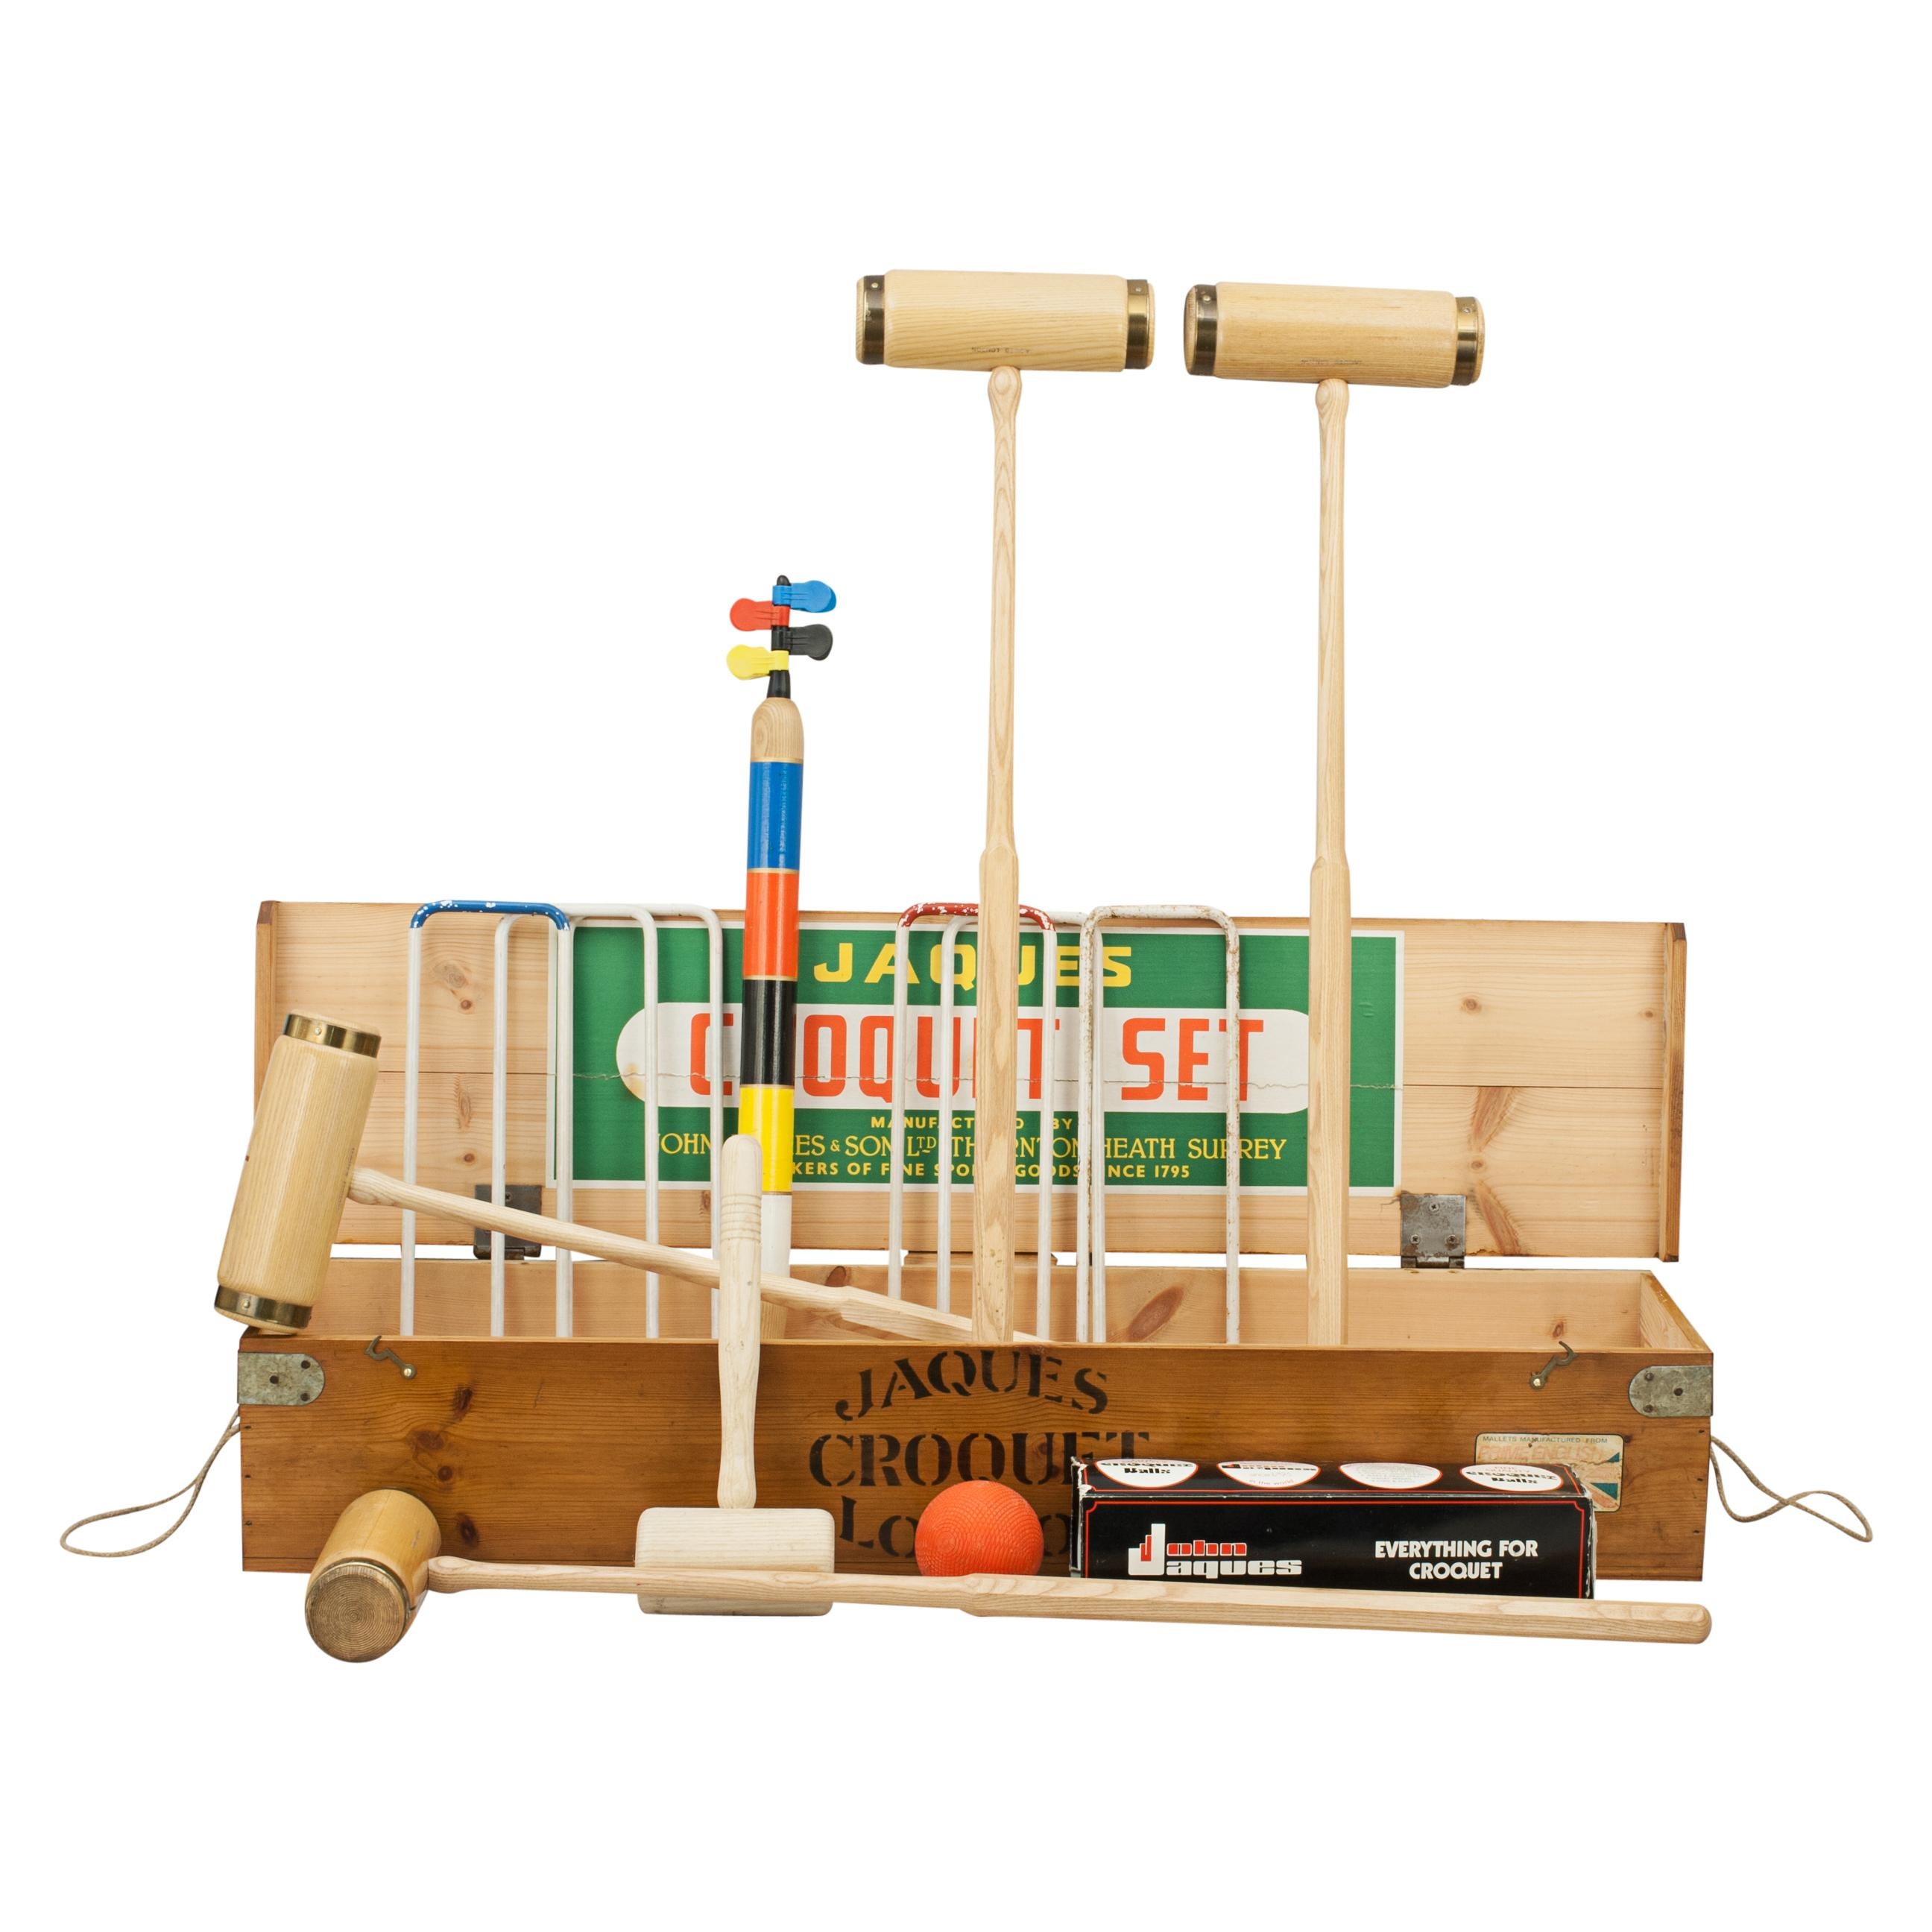 Jaques brassbound croquet set.
A Jaques croquet set in original pine box with four brass bound ash mallets. To complete the set there are four colored balls in the standard croquet colors, six bent metal hoops, wooden mallet, 4 sprung clips and one